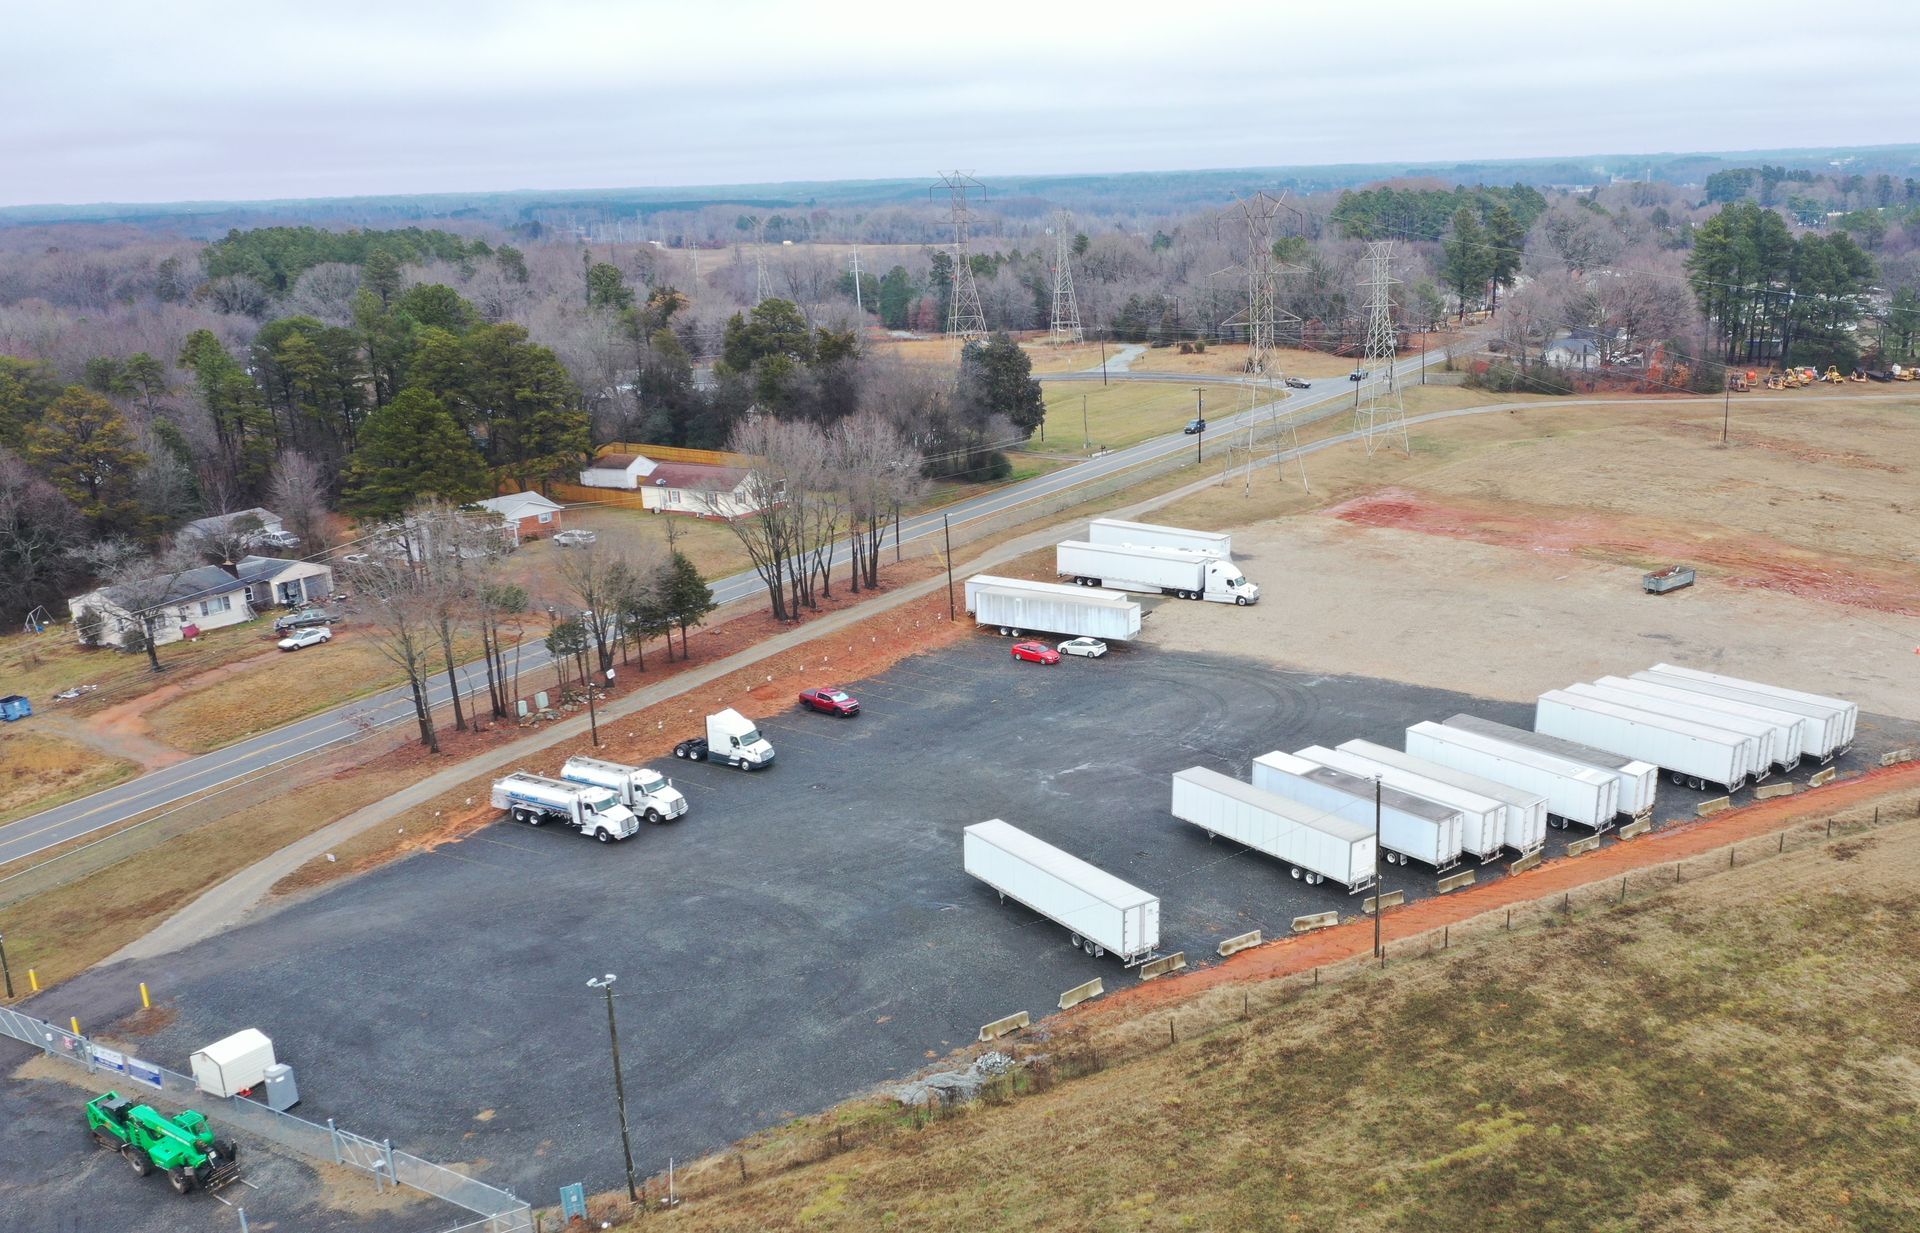 An aerial view of a parking lot filled with trucks and trailers.